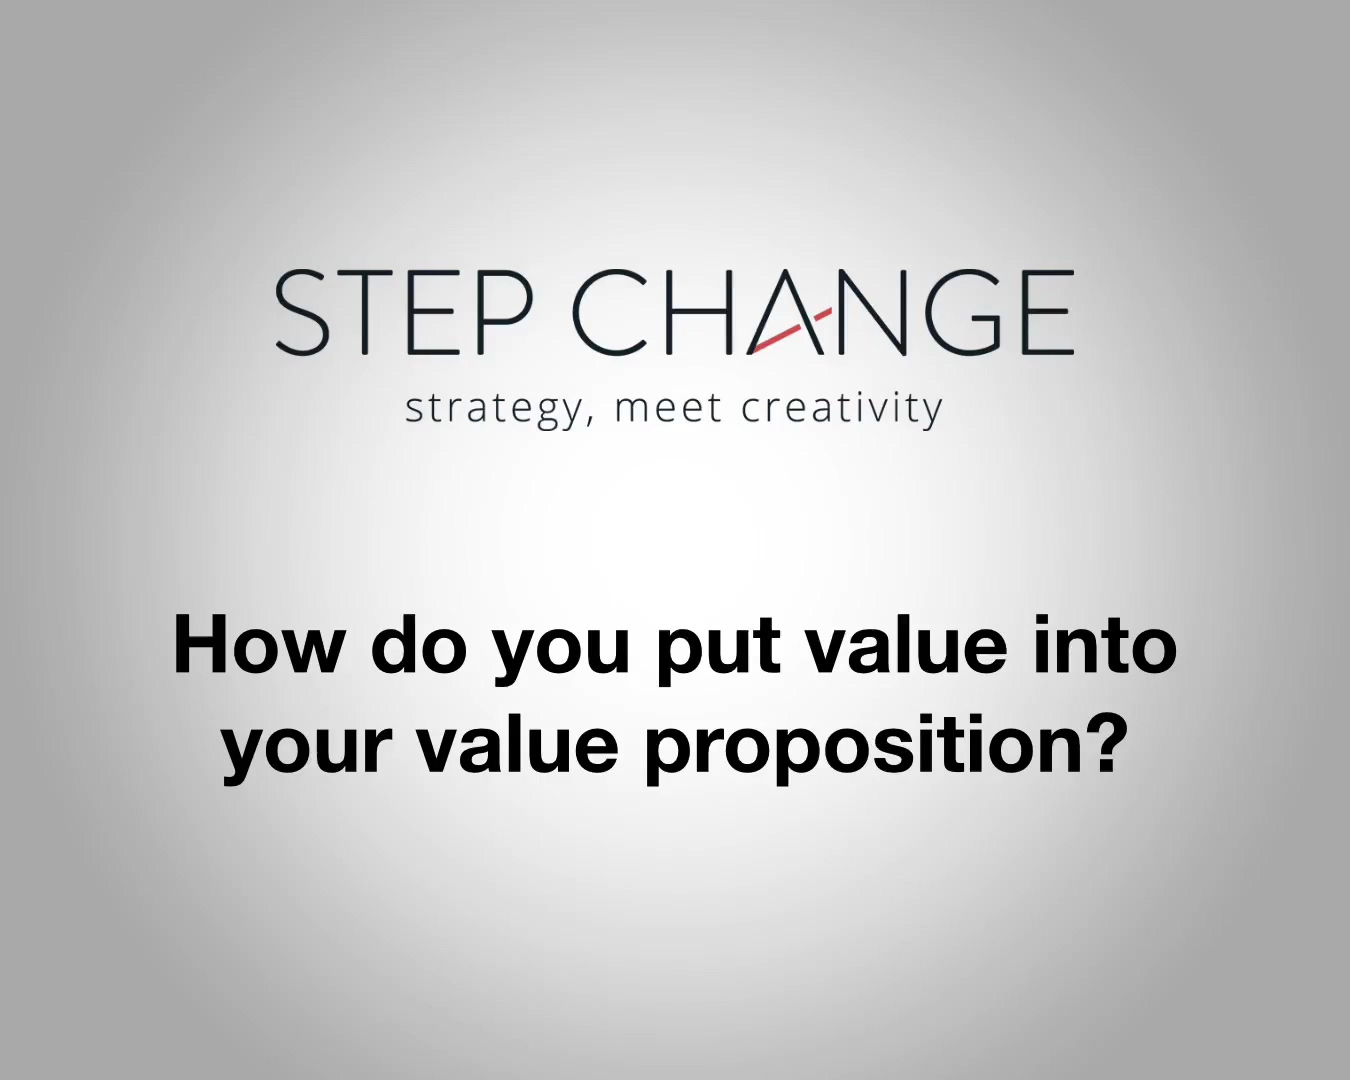 Value in value proposition